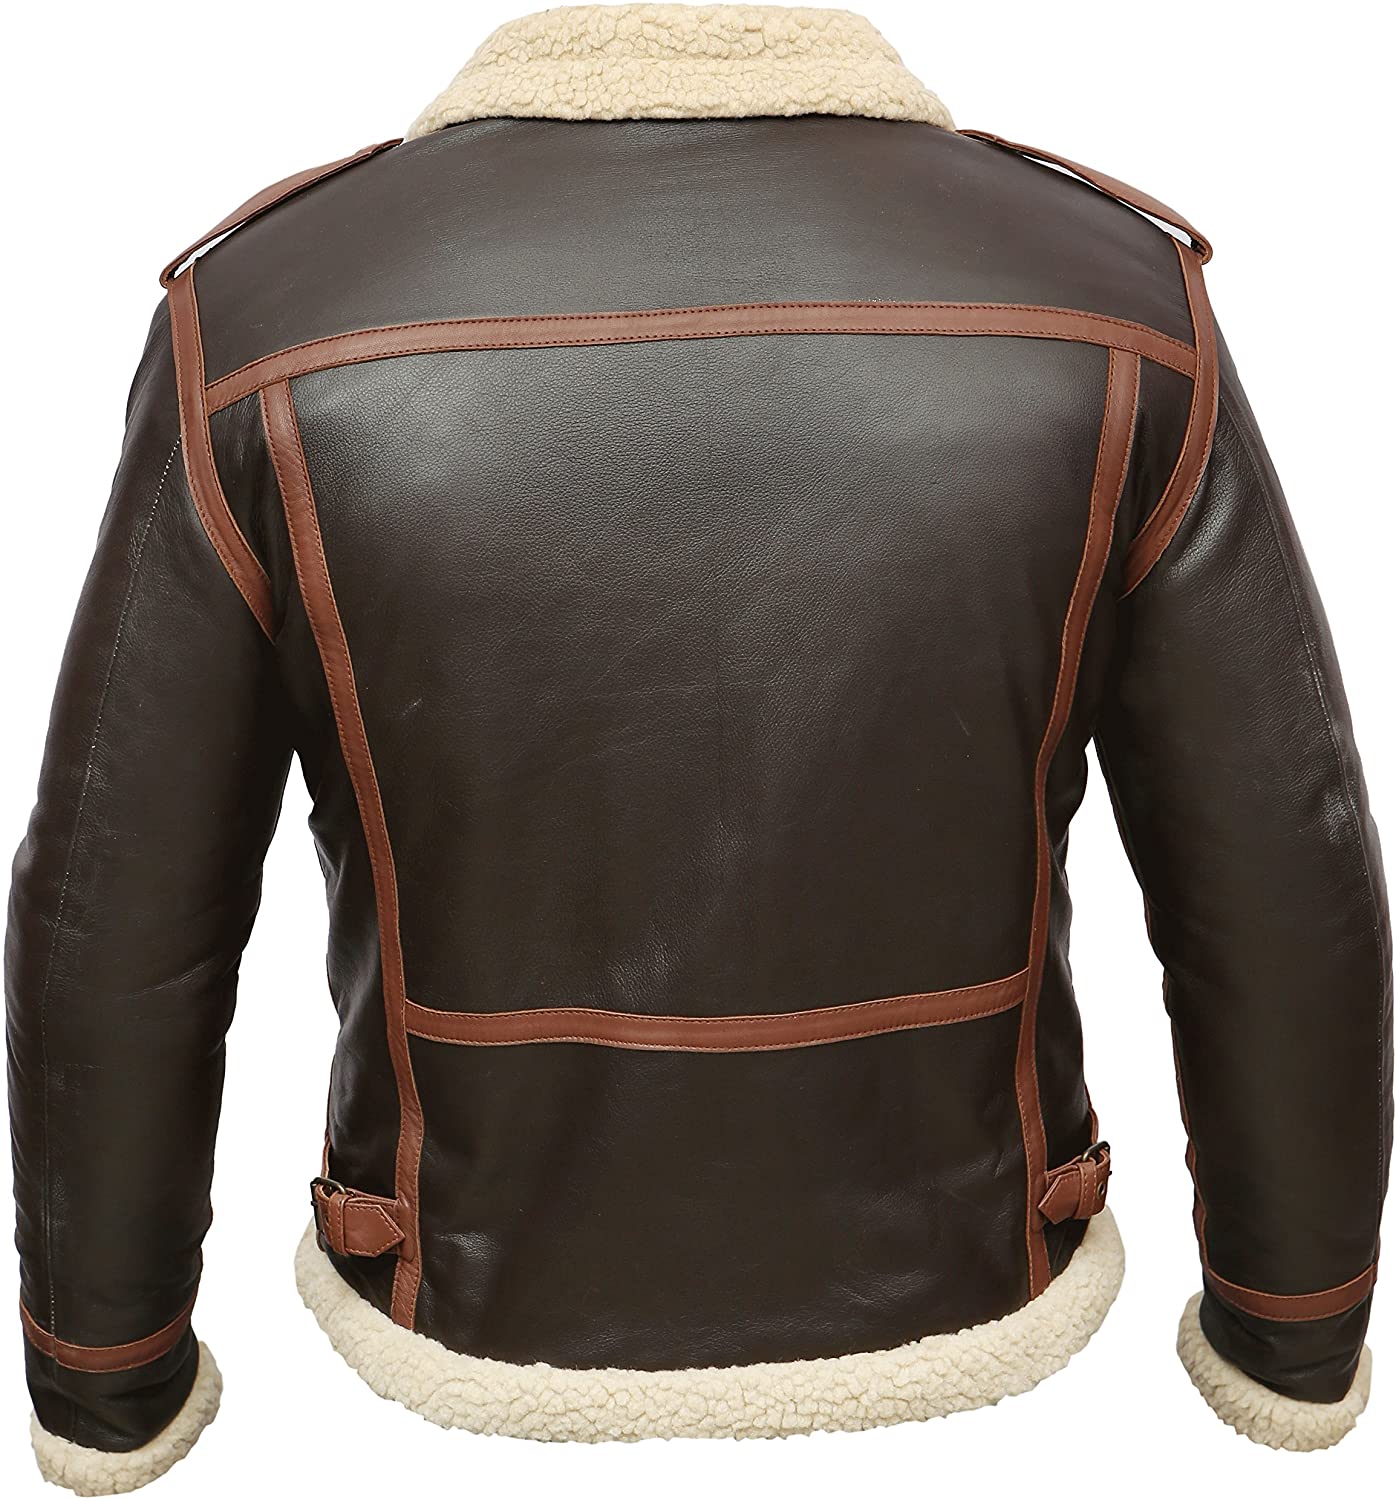 Mens Resident Evil 4 Leon Kennedy Shearling Leather Jacket - A2 Jackets